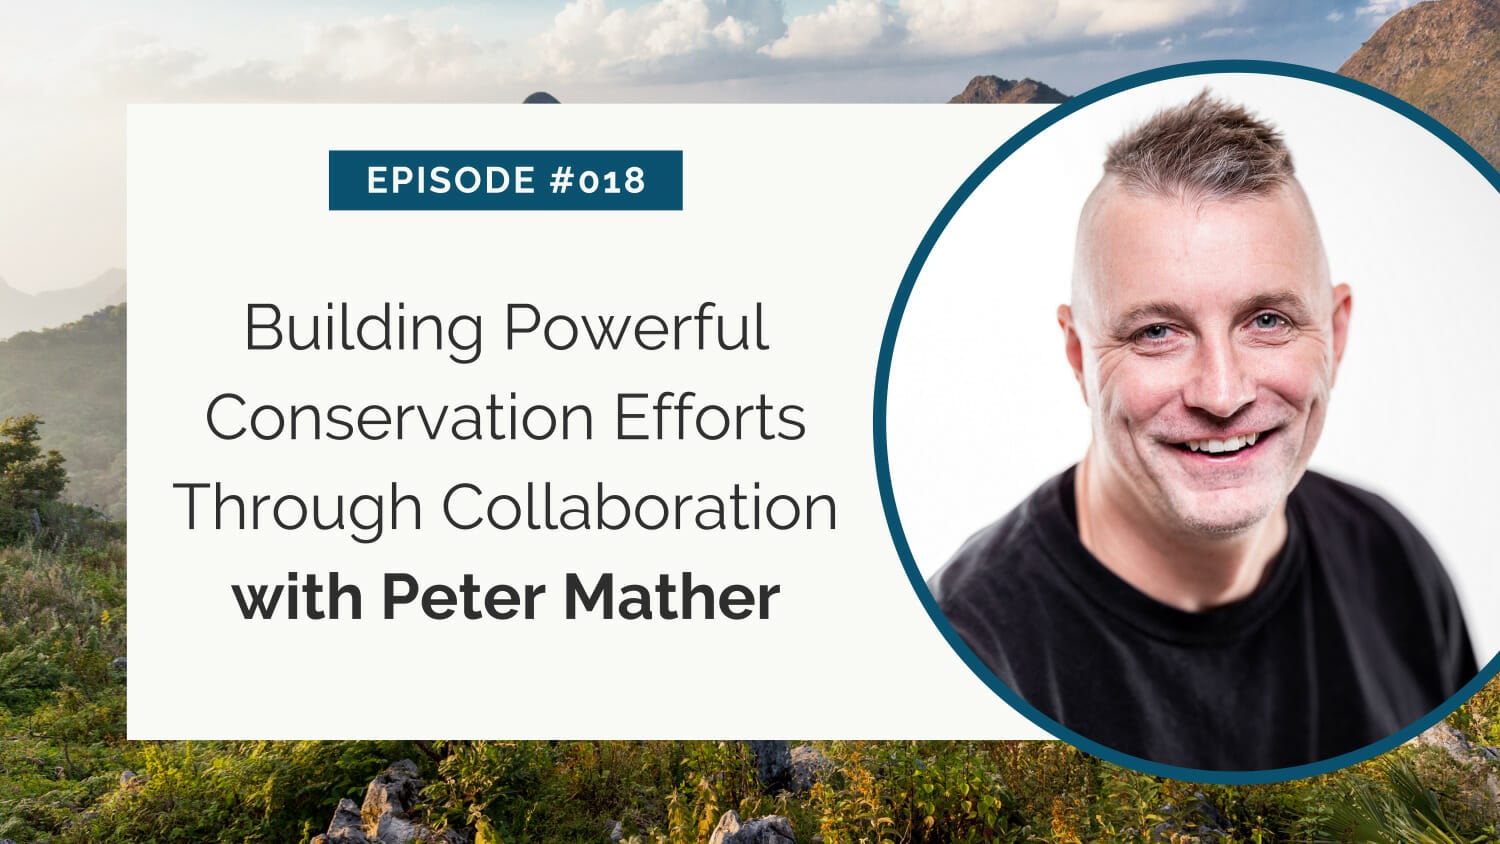 Podcast graphic promoting episode #018 titled "building powerful conservation efforts through collaboration with peter mather" featuring a smiling man.